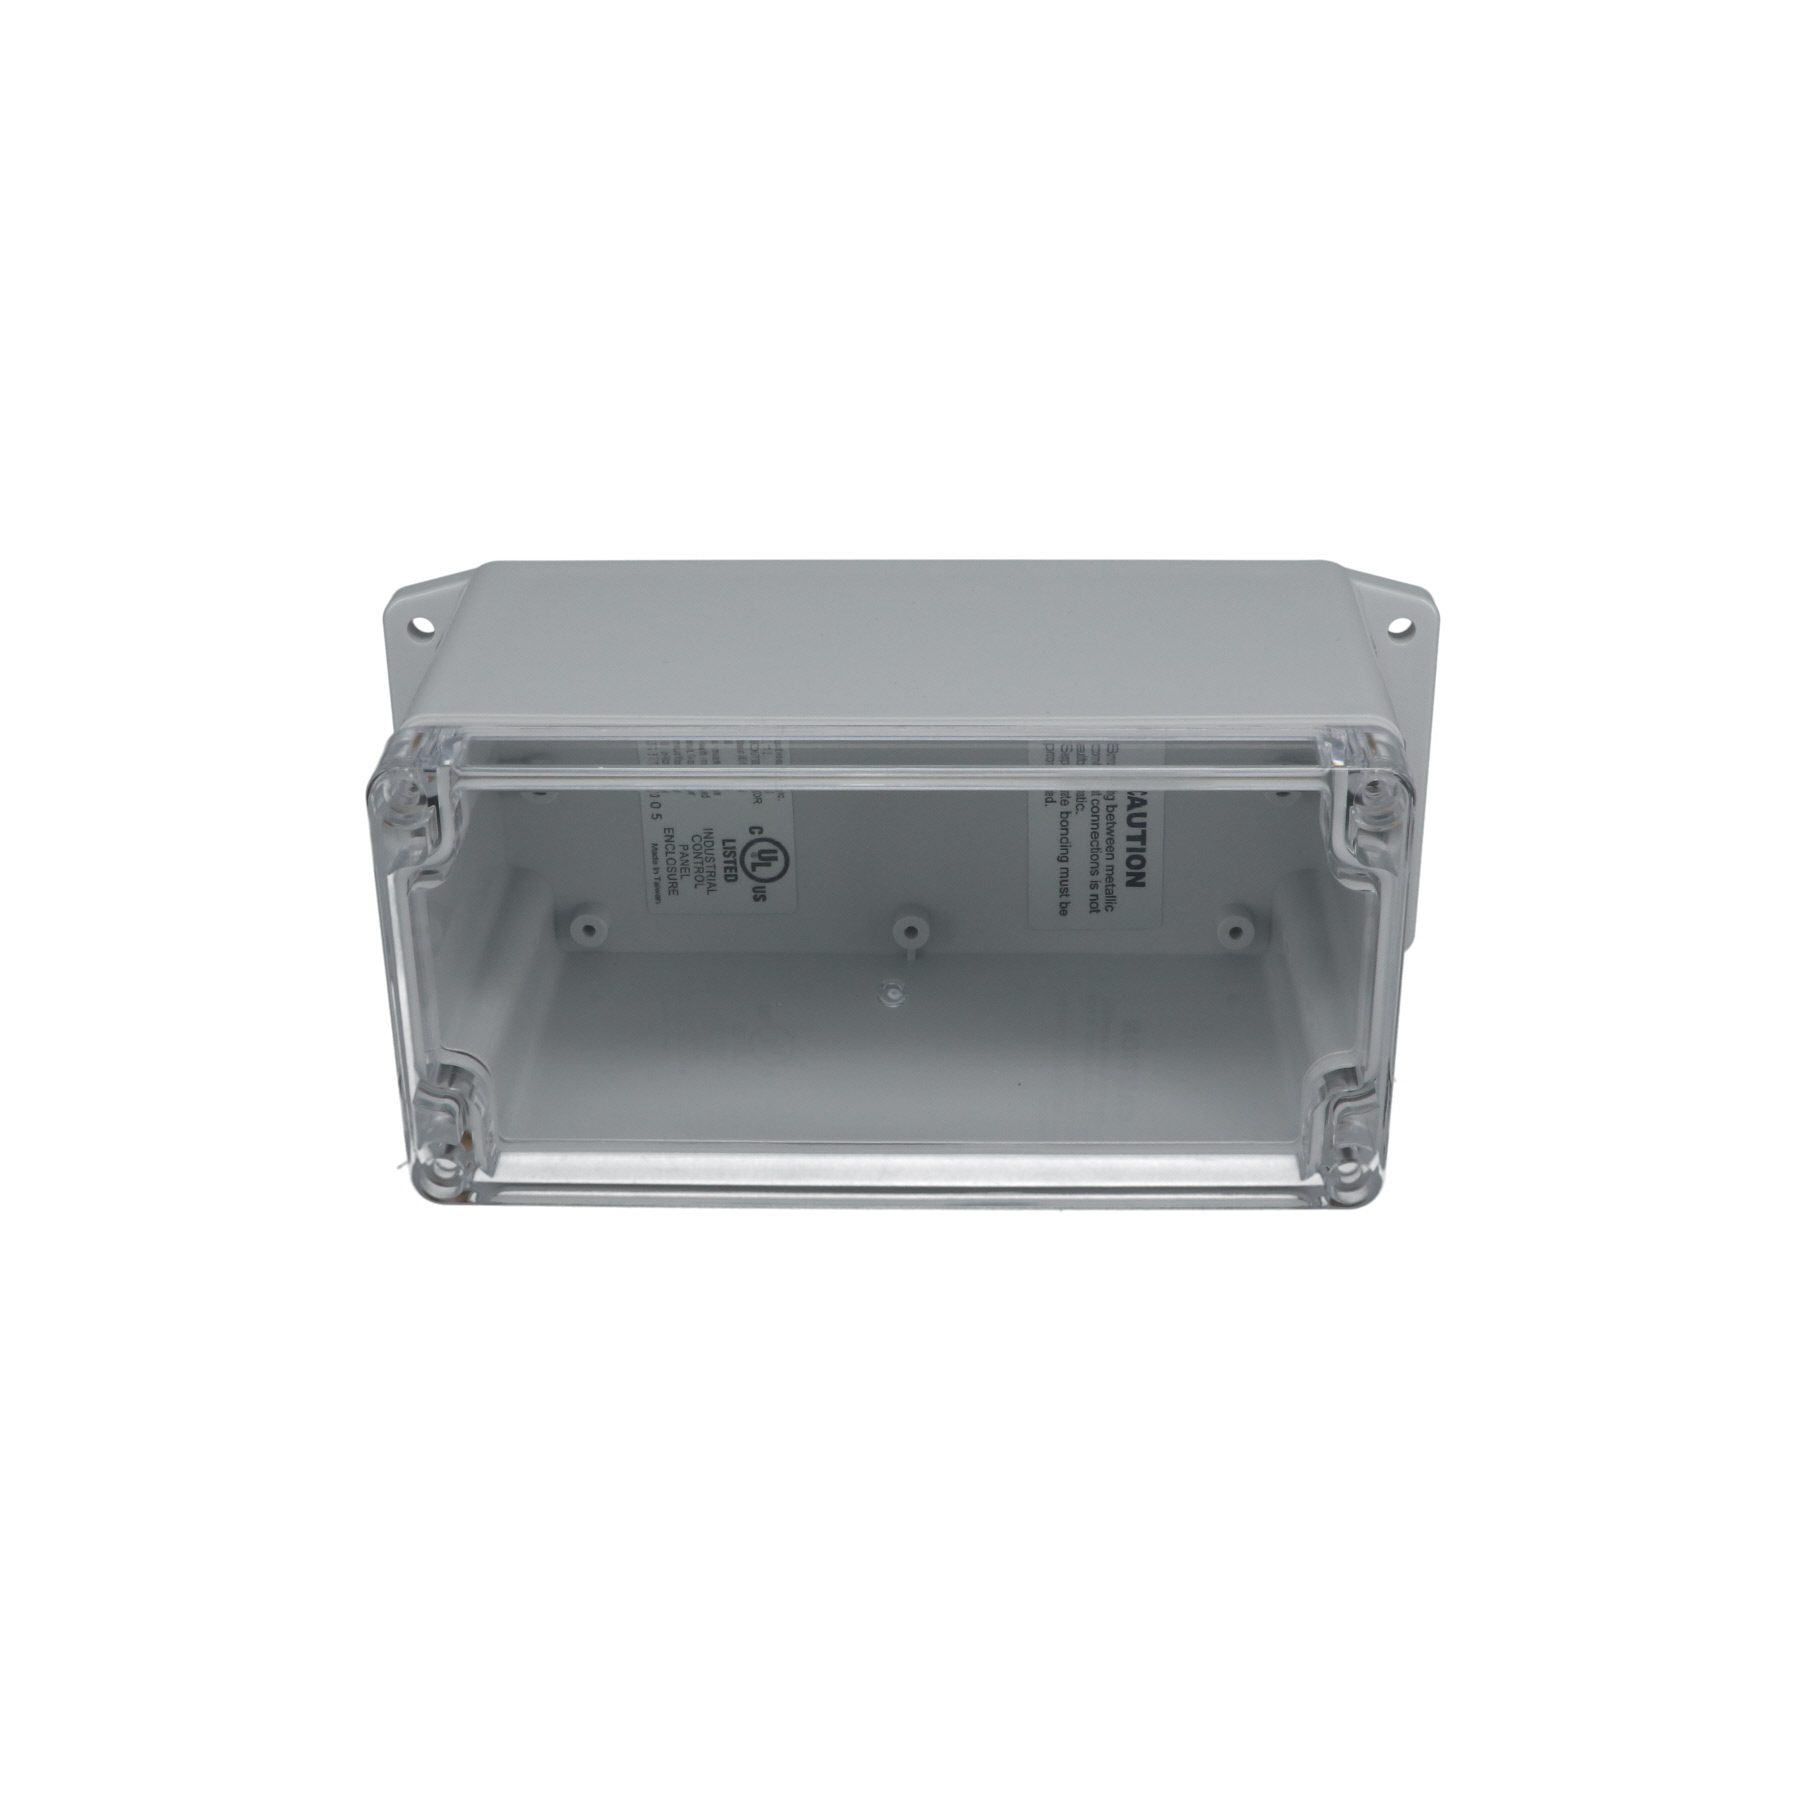 IP65 NEMA 4X Box with Clear Cover and Mounting Brackets PN-1333-CMB